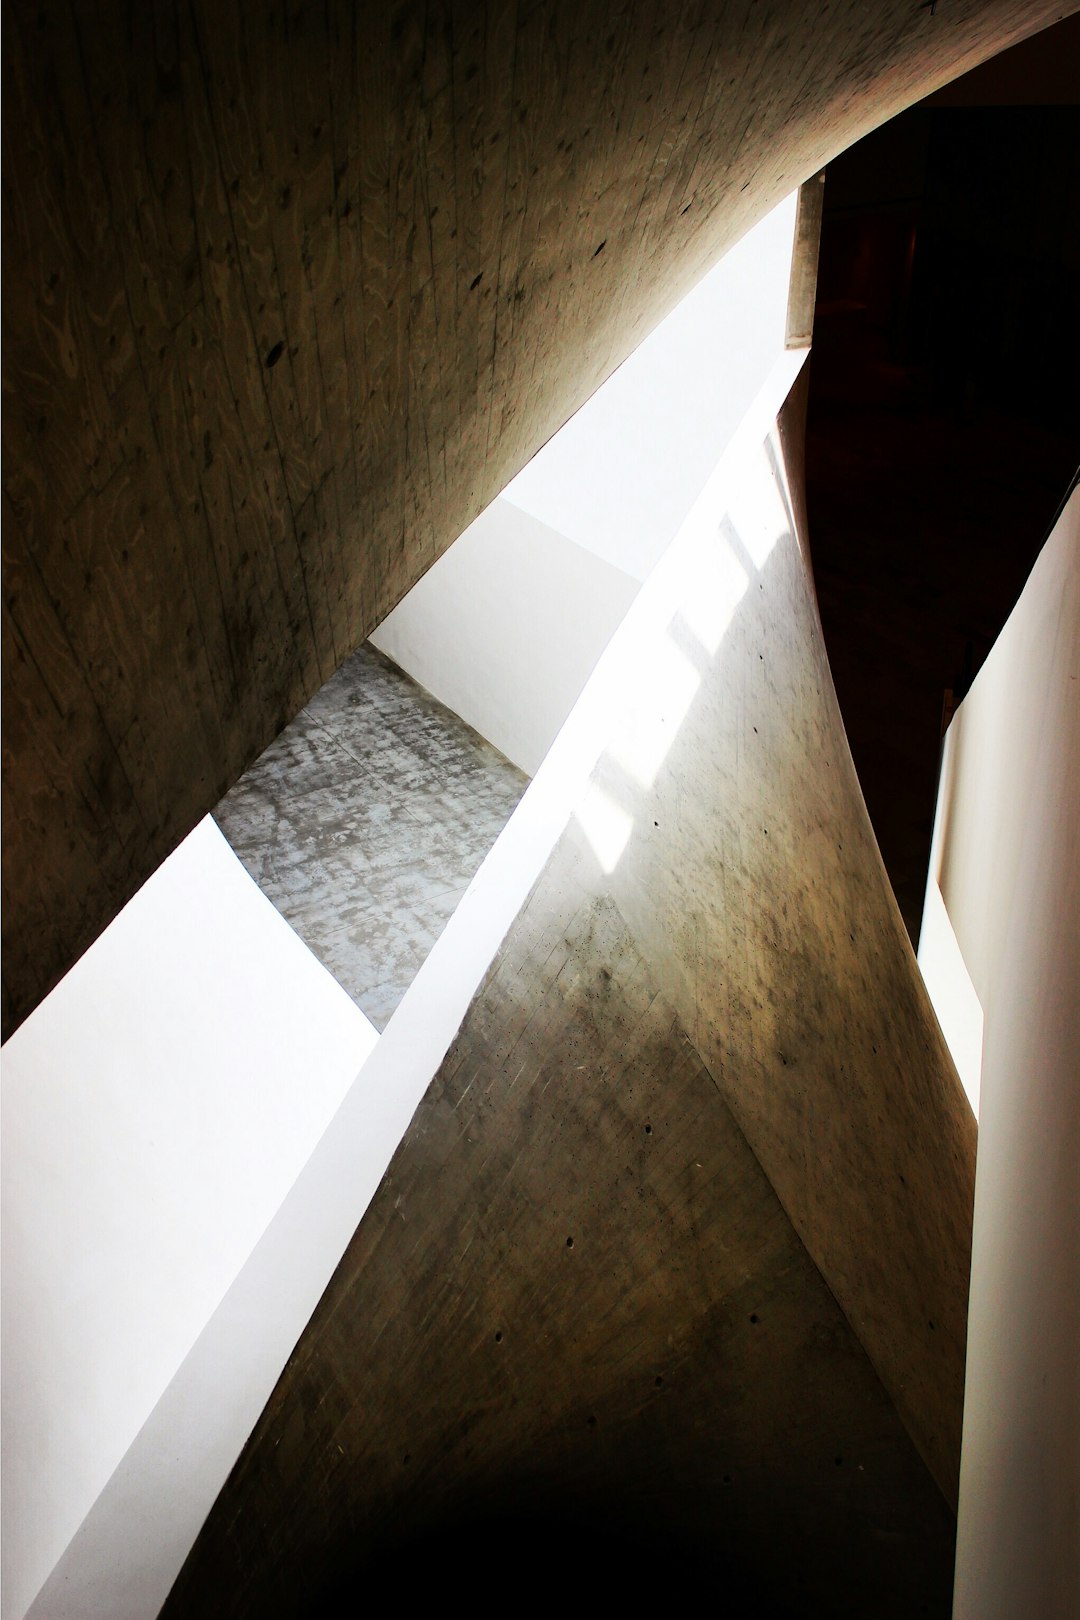 Edges of rocky architectural walls and designs reflecting light and casing shadows